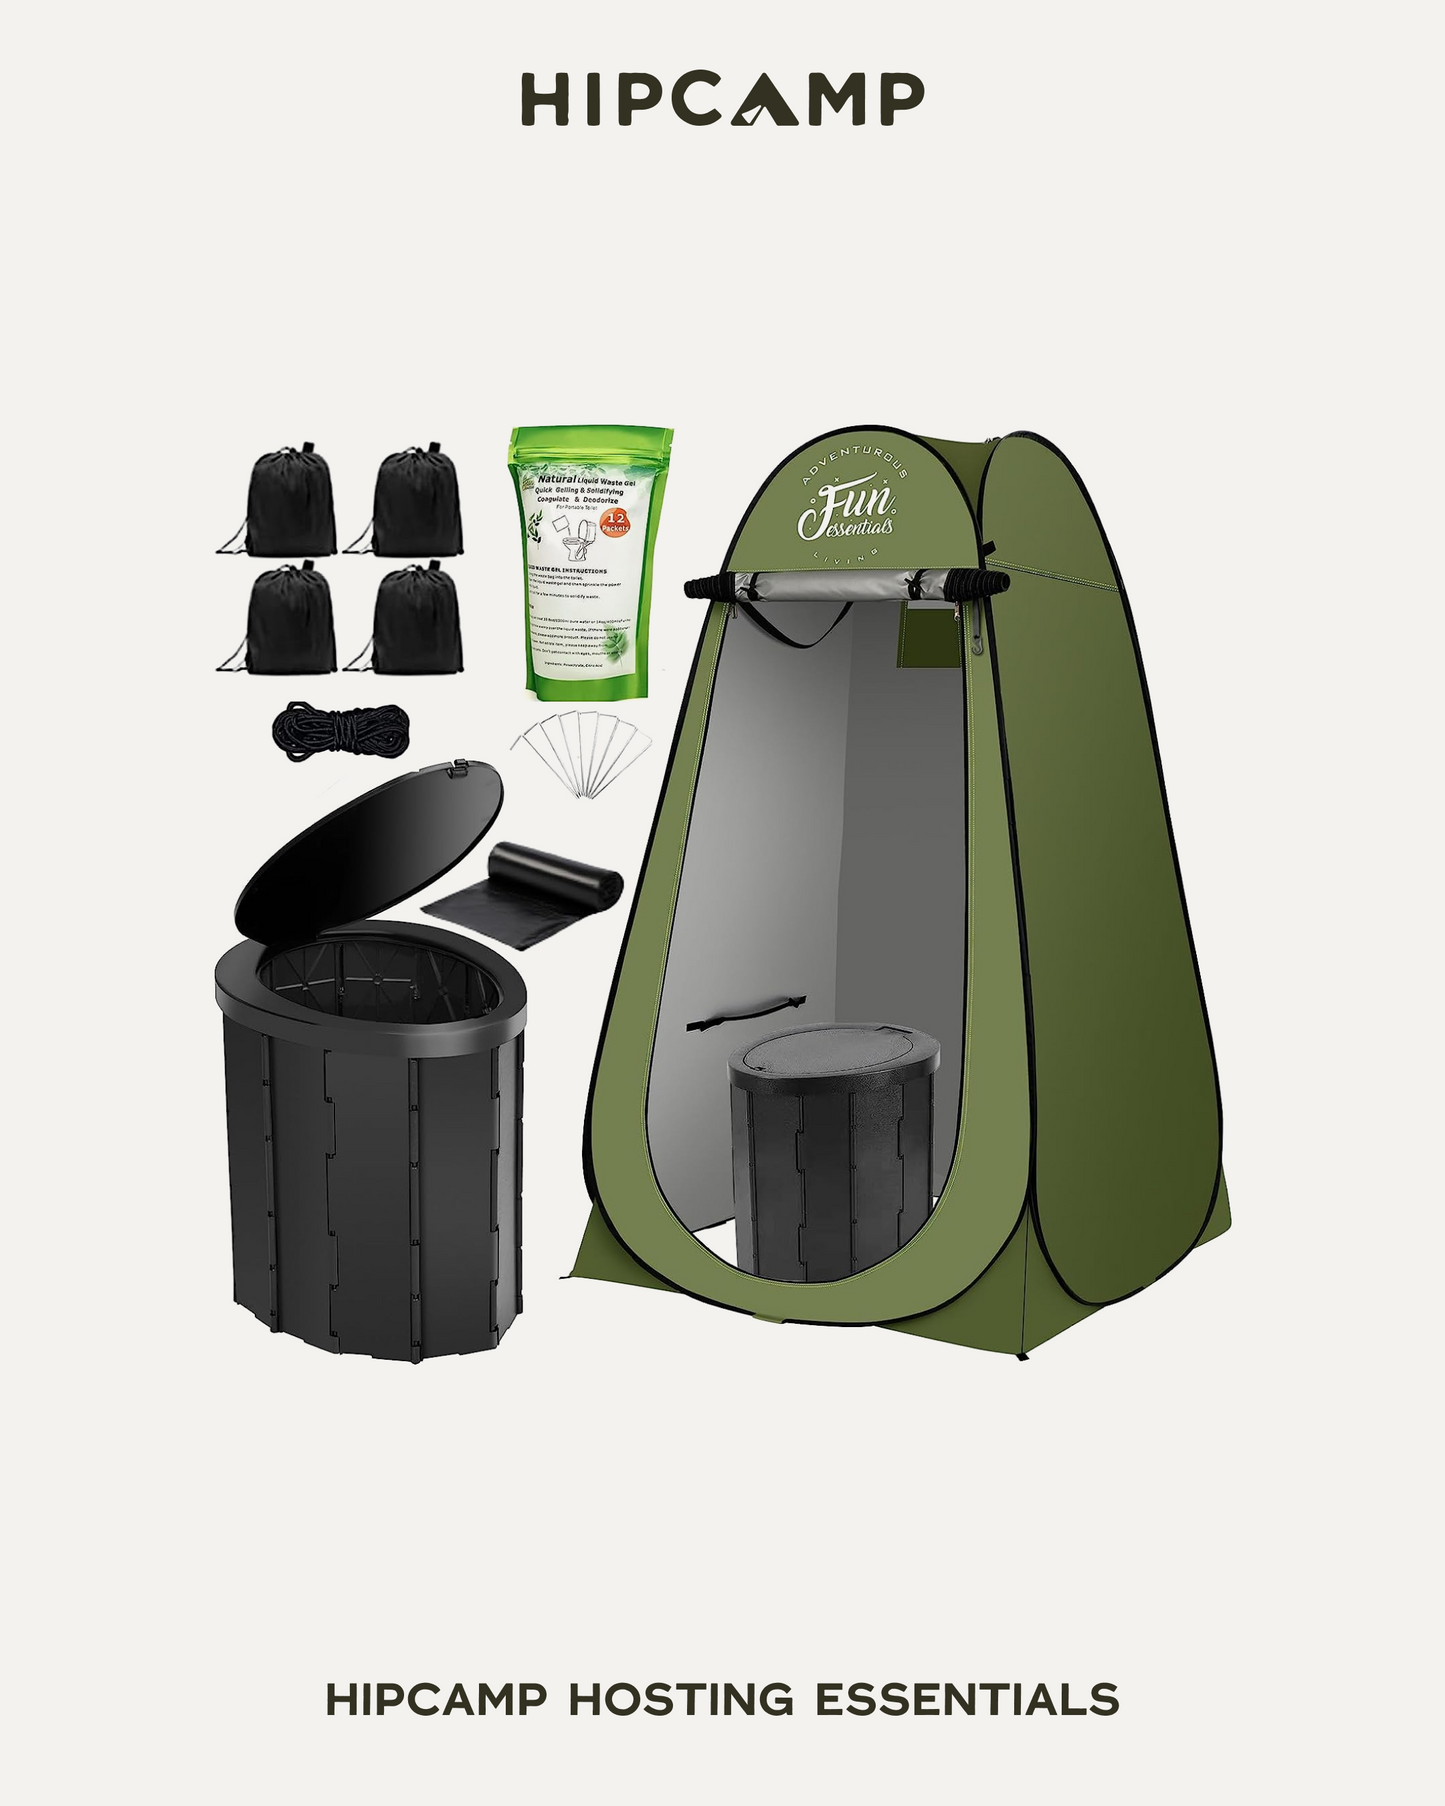 Portable camping toilet with pop up privacy tent